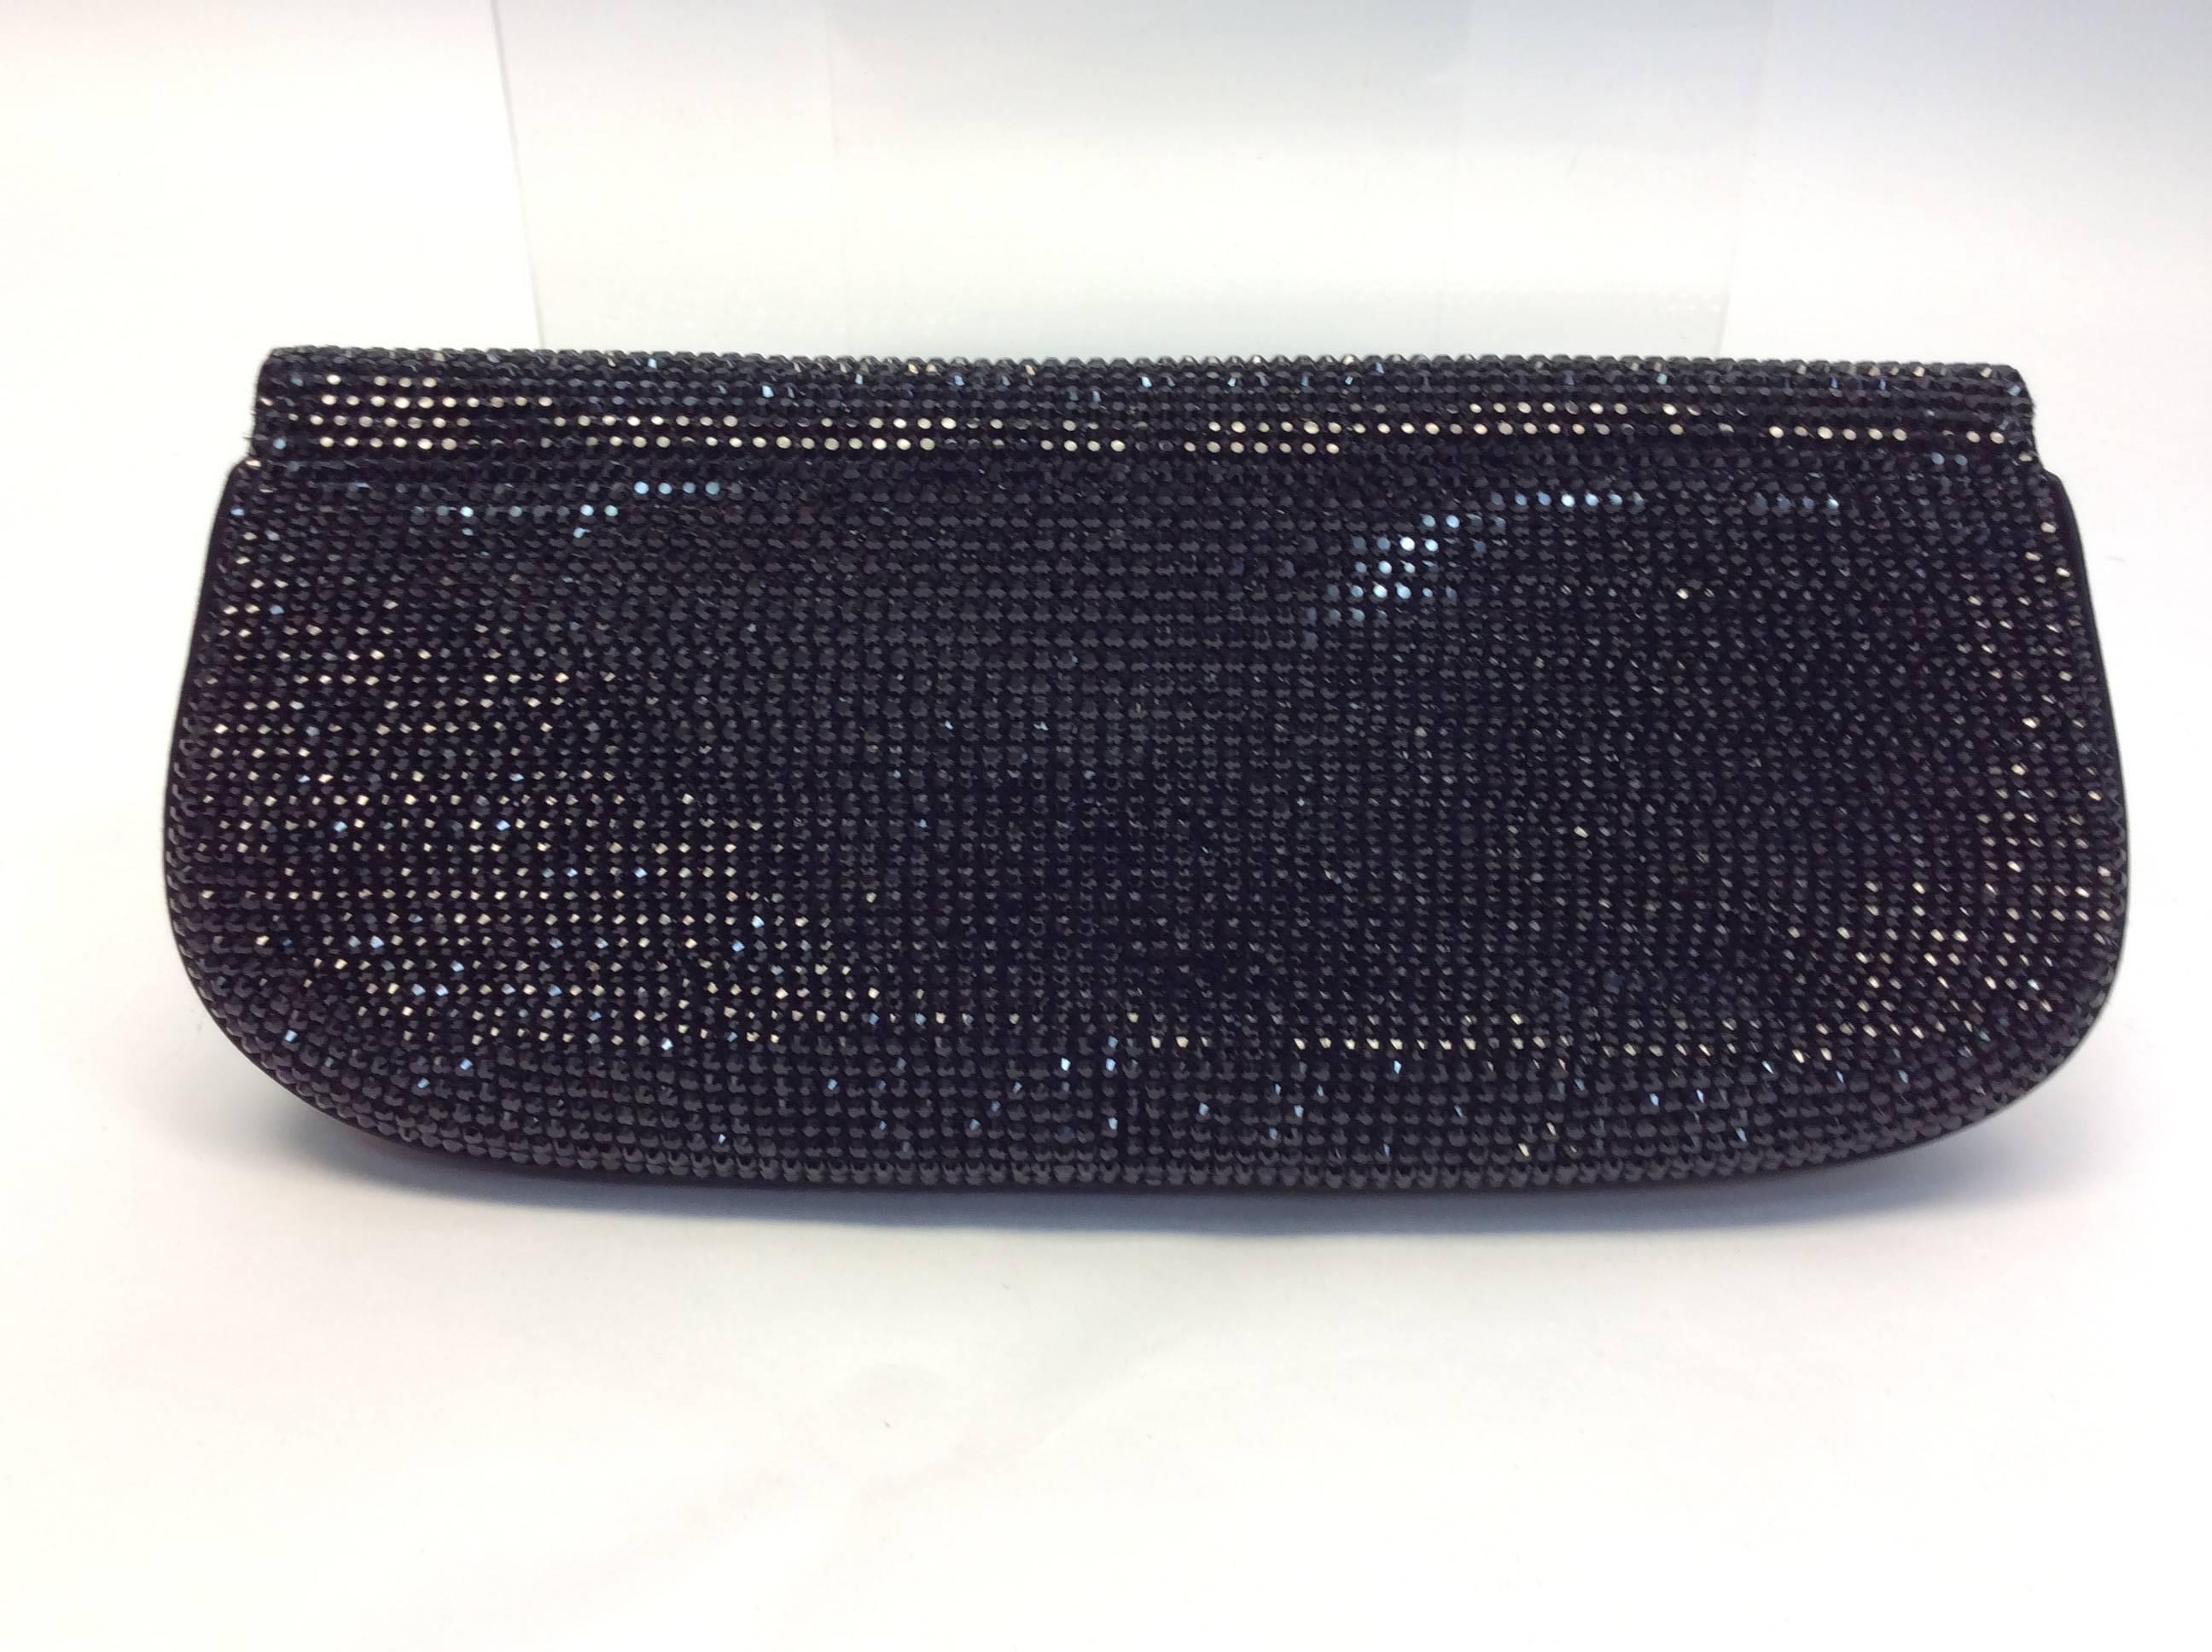 Judith Leiber Black Beaded Clutch In Excellent Condition For Sale In Narberth, PA